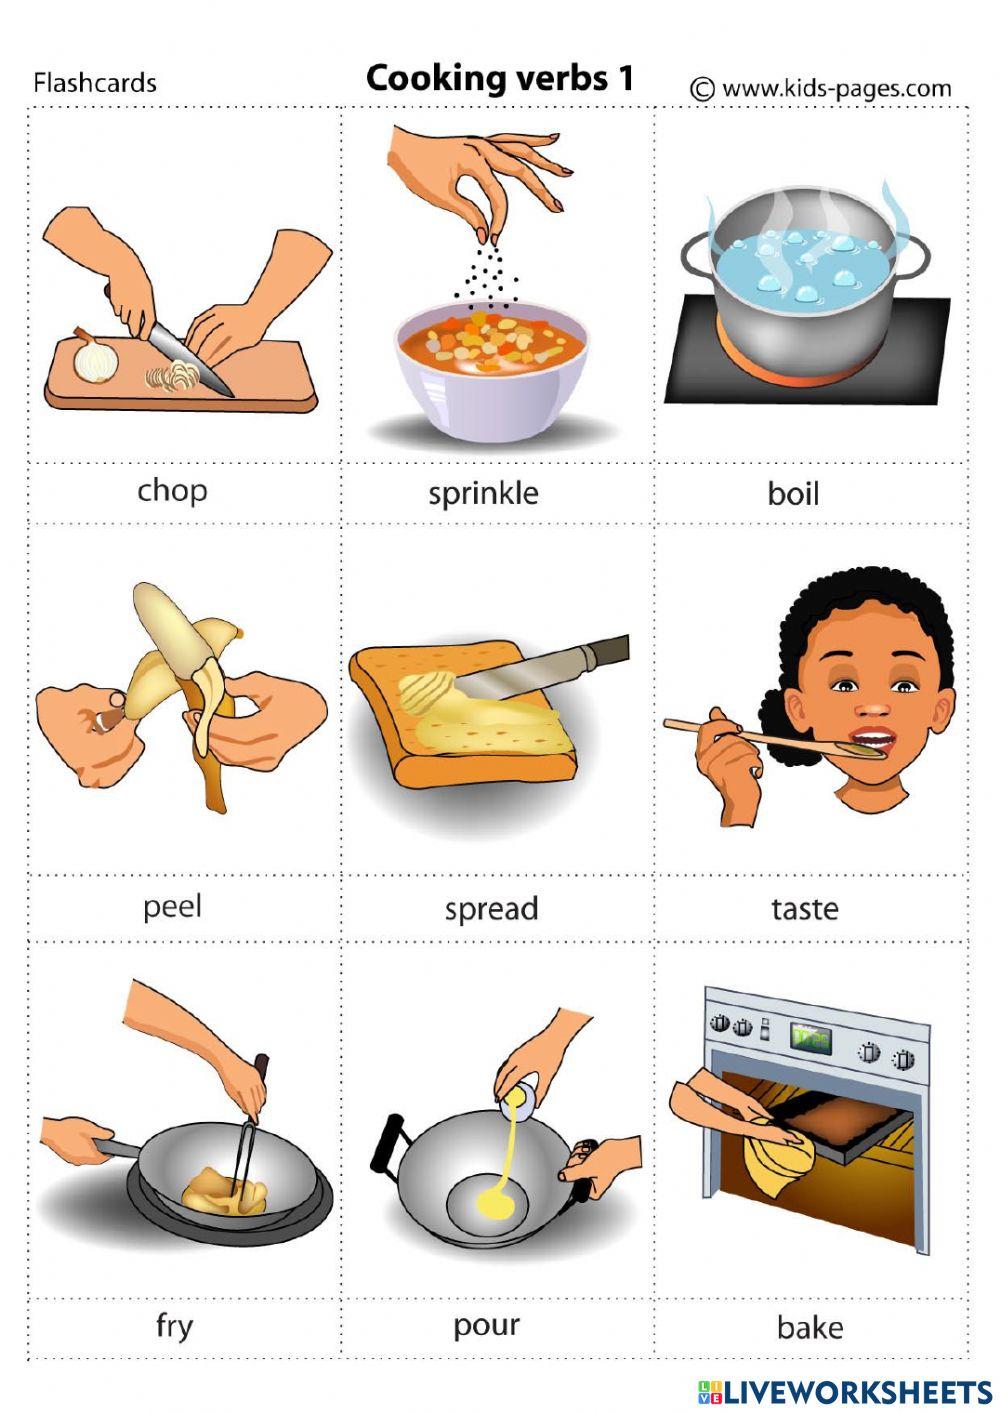 Cooking verbs for Kids. Глаголы готовки на английском. Приготовление еды на английском языке. Глаголы приготовления пищи на английском. Pdf cook